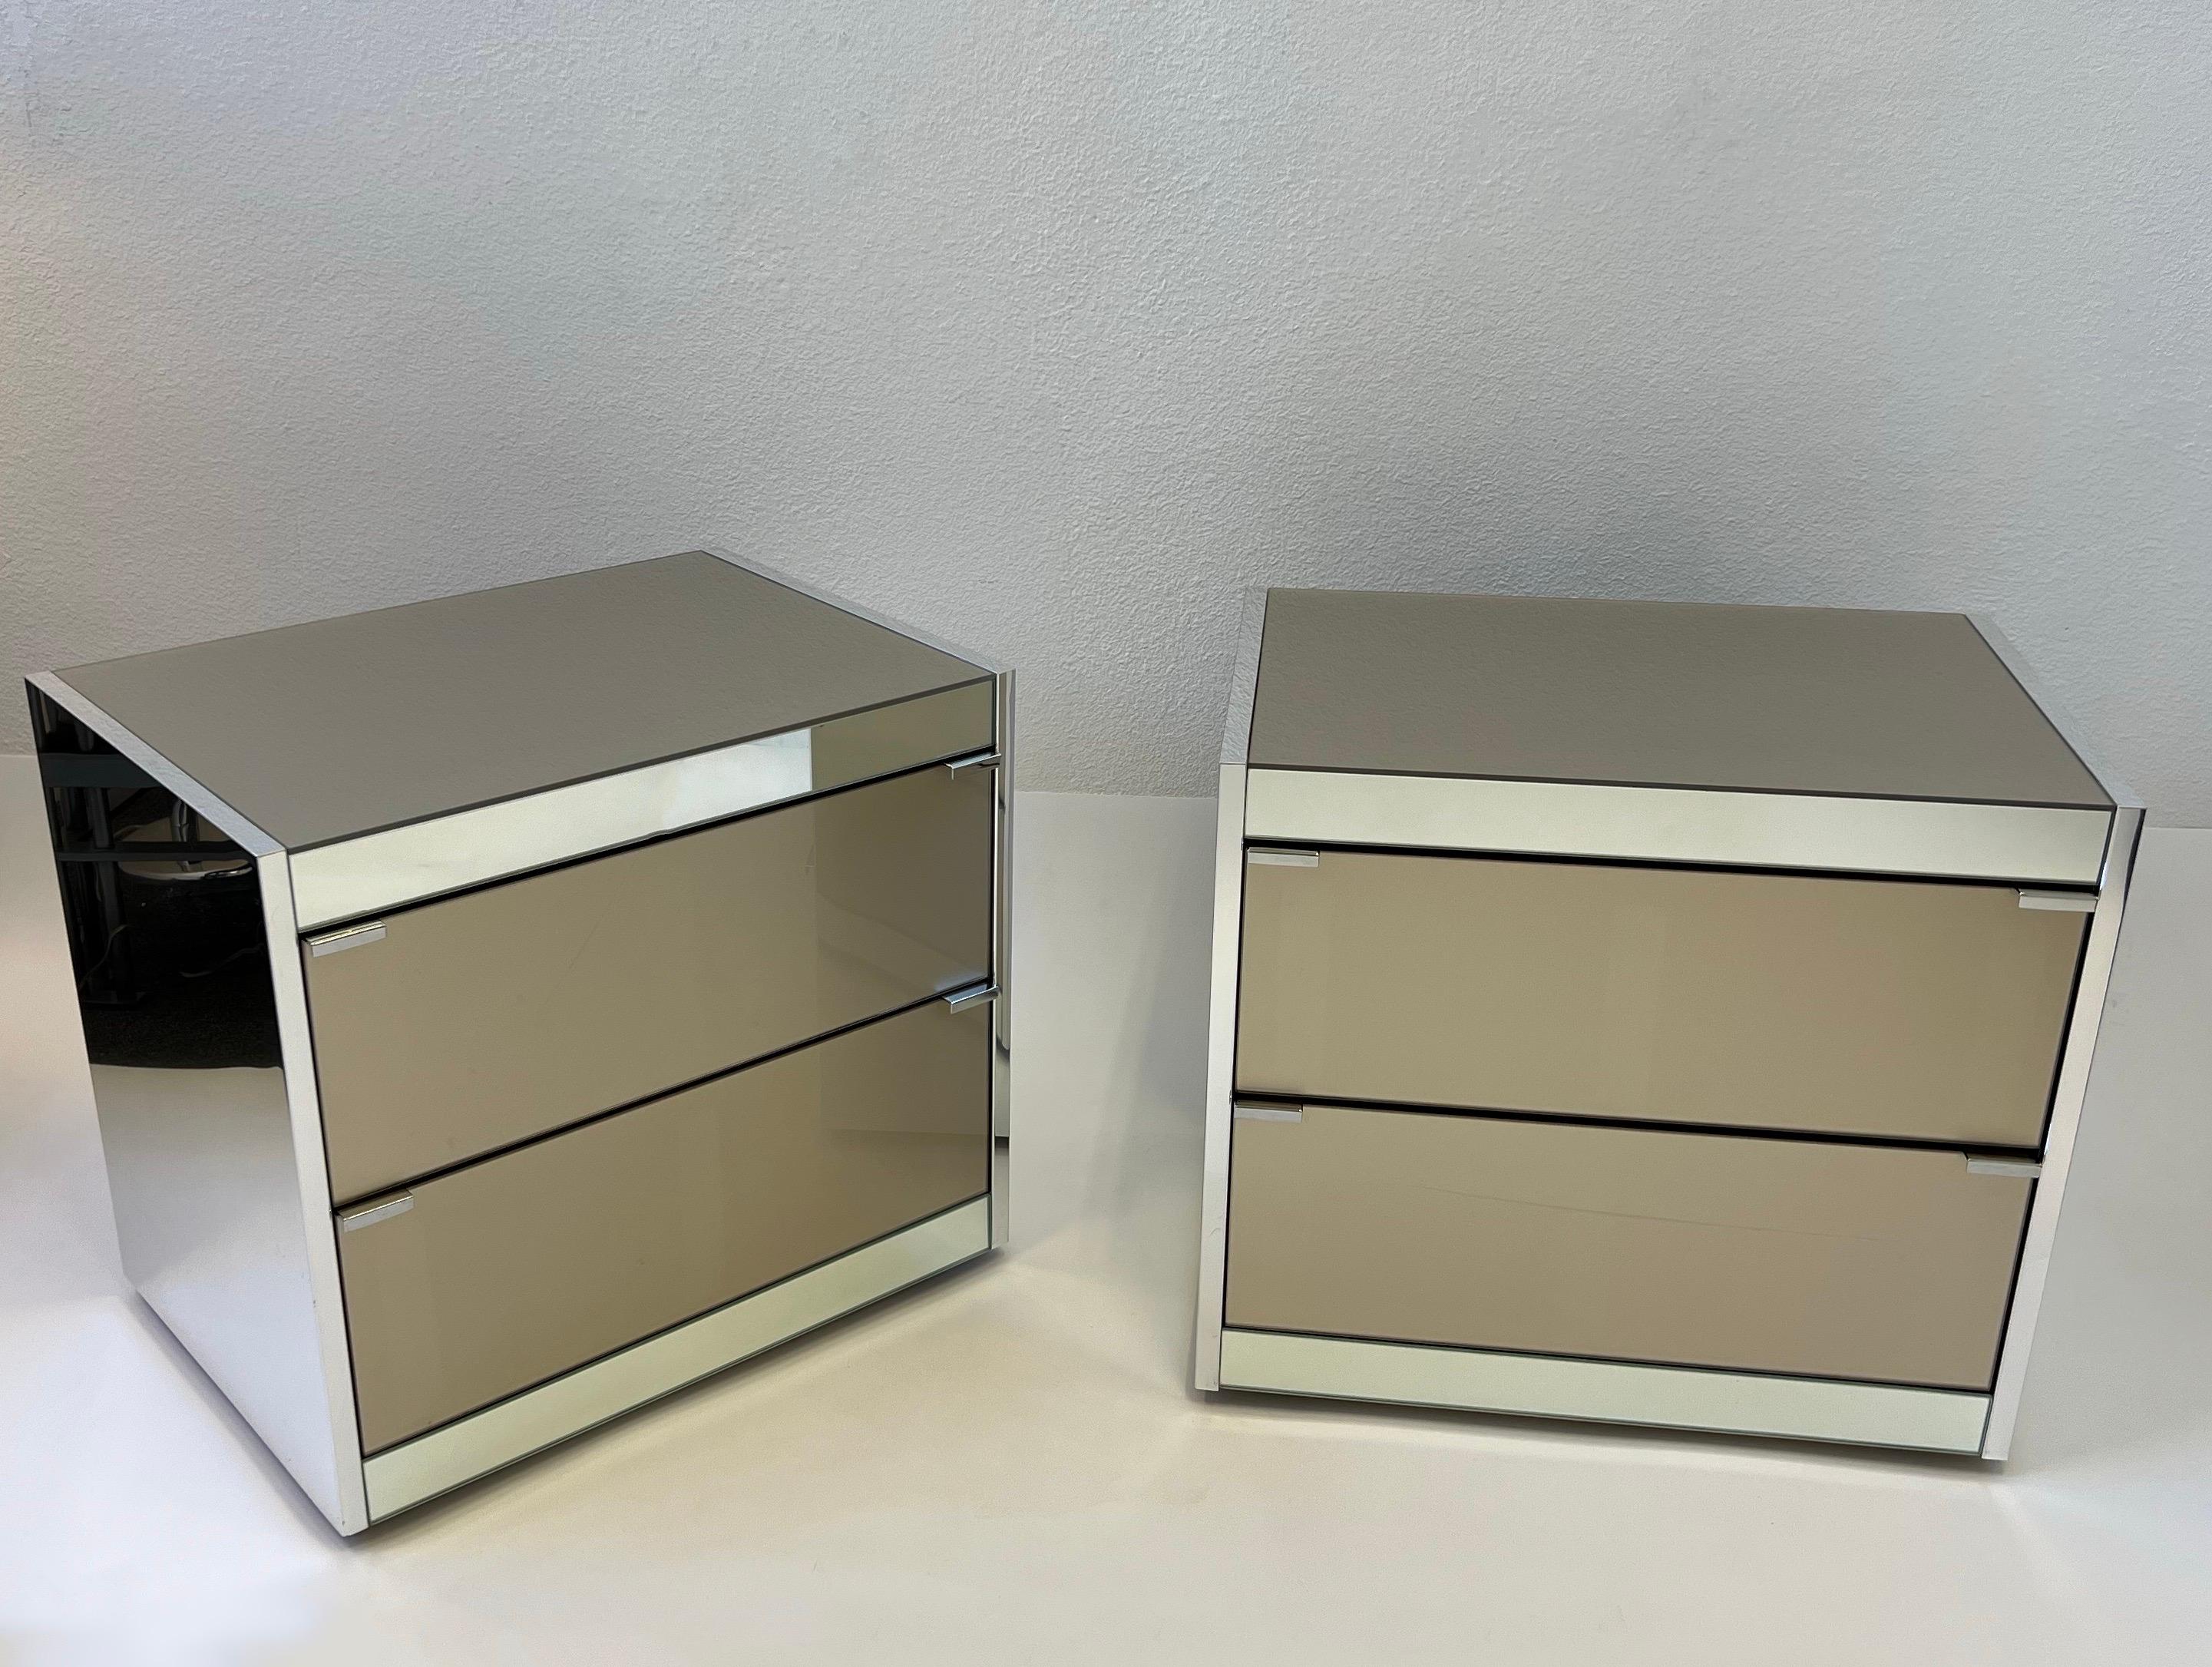 Pair of 1980s polish aluminum and glass, two drawer nightstands by Ello Furniture. 
The sides are polish aluminum, the tops and front drawers are champagne colored glass. 
In original vintage condition shows minor wear consistent with age (See